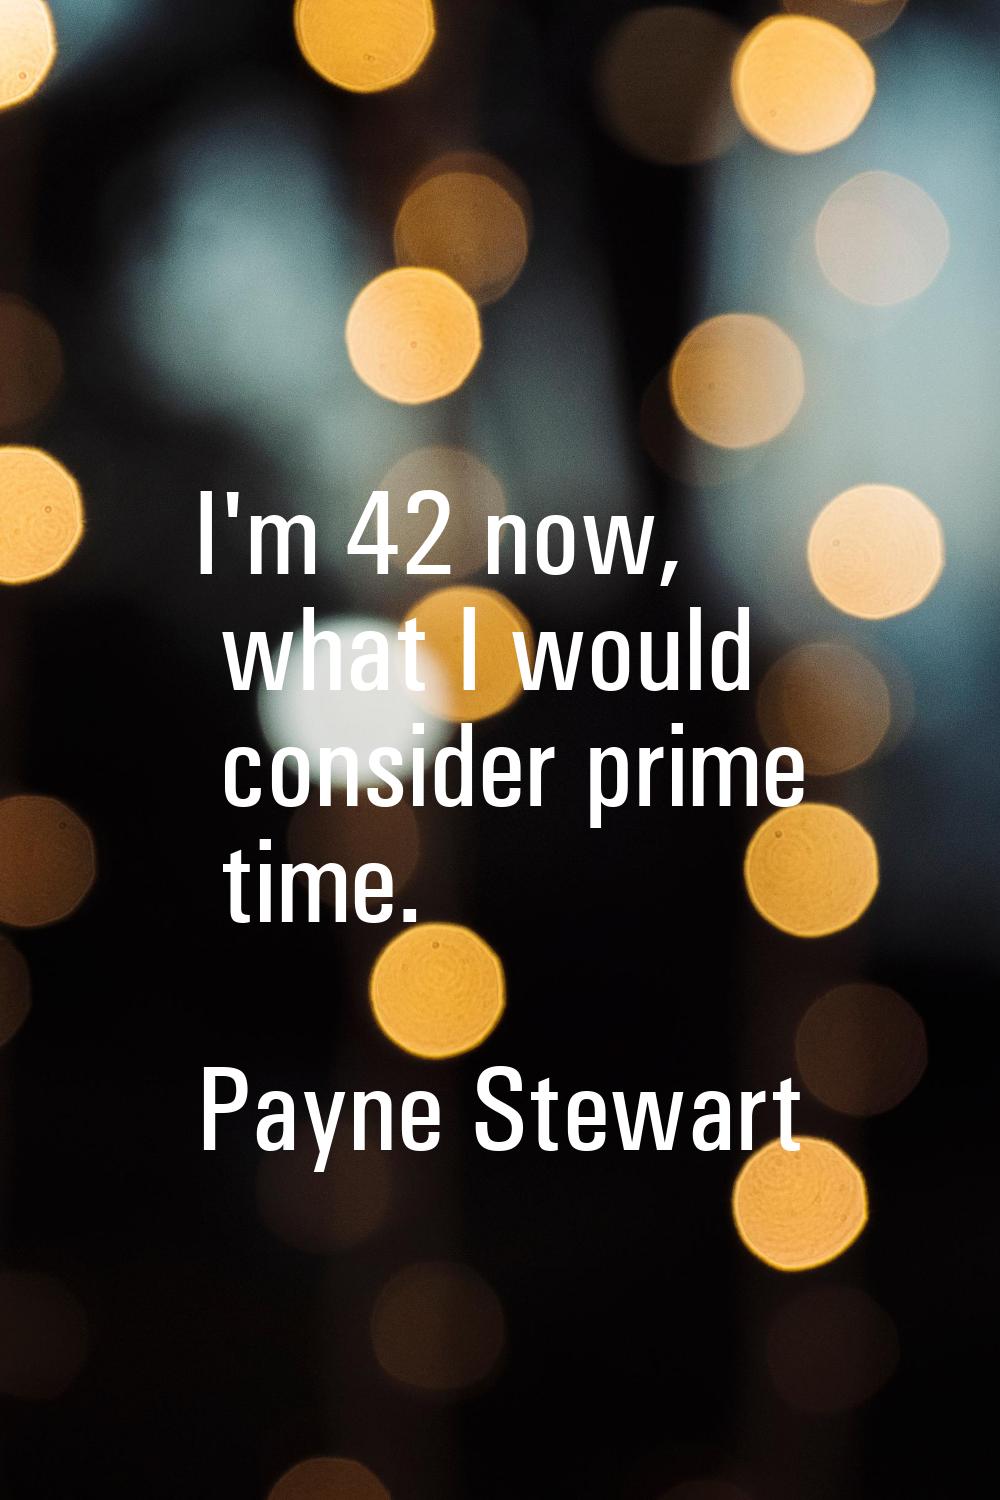 I'm 42 now, what I would consider prime time.